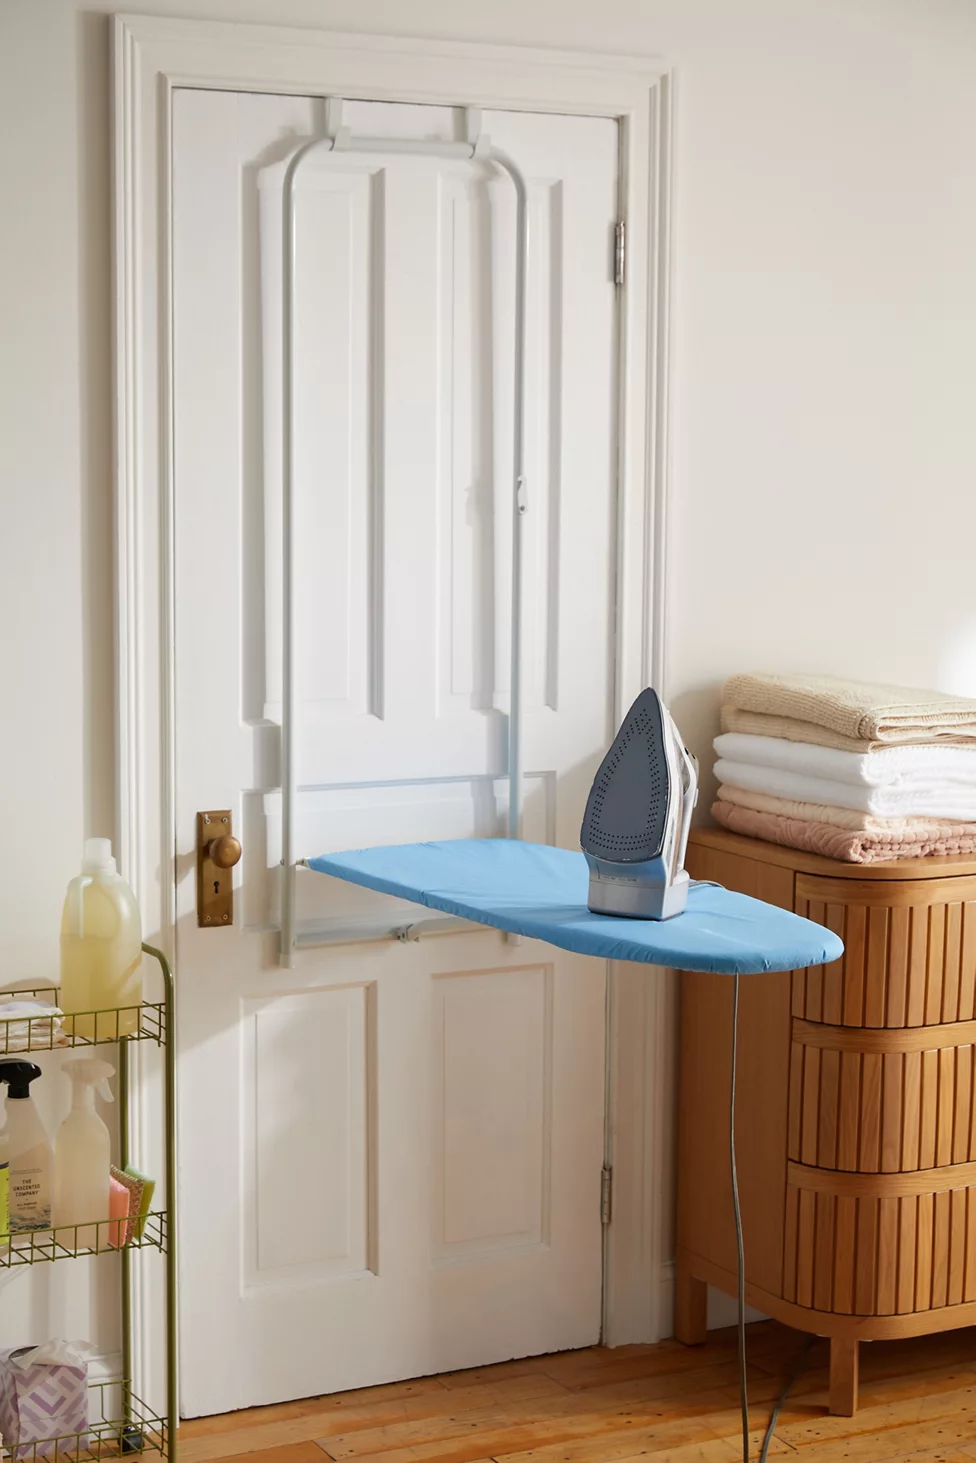 Maximize Space with an Over the Door Ironing Board